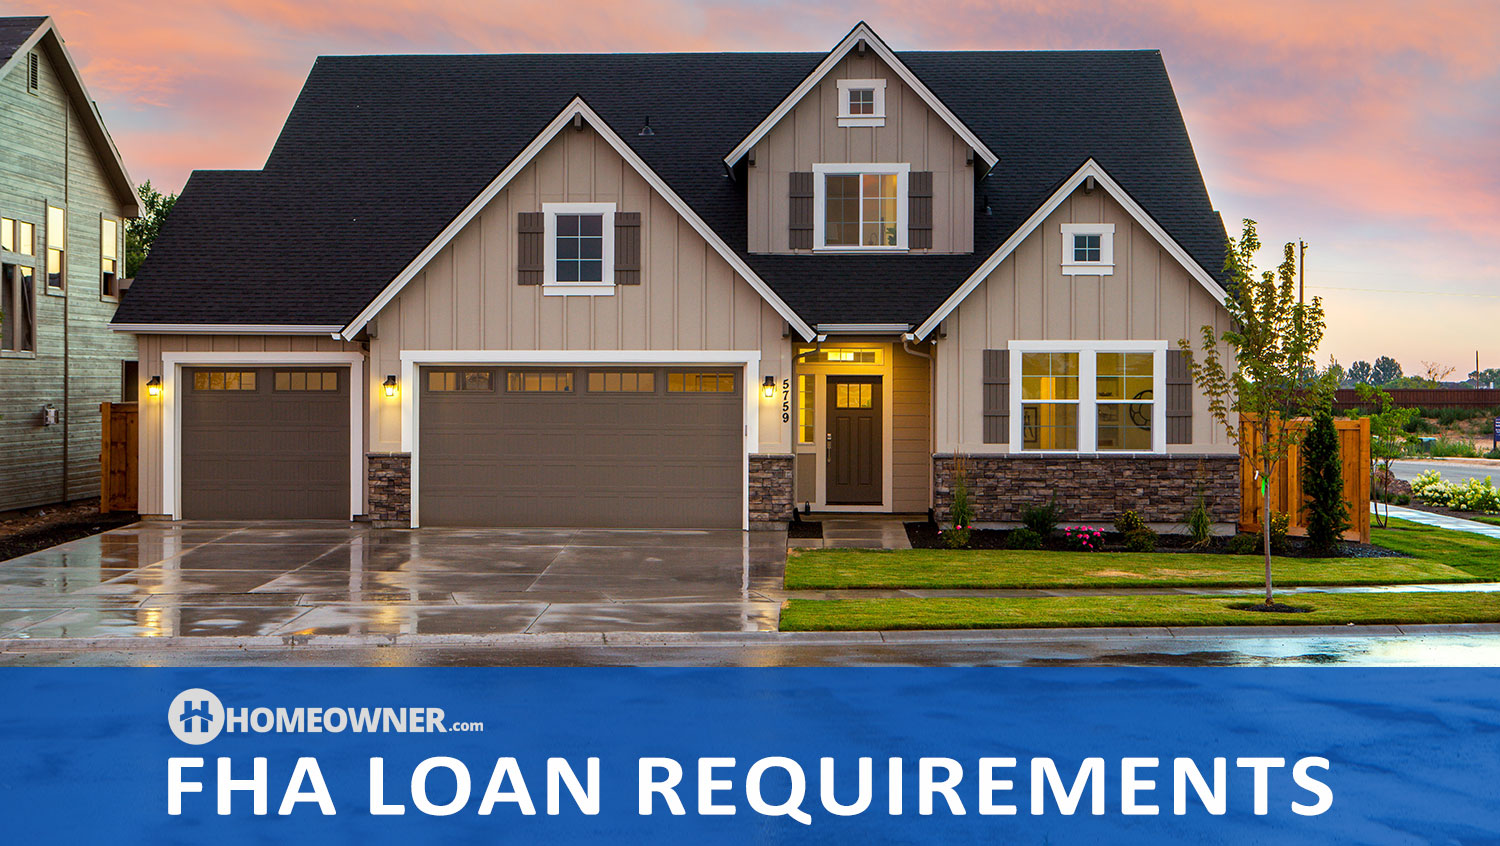 How To Qualify for an FHA Loan